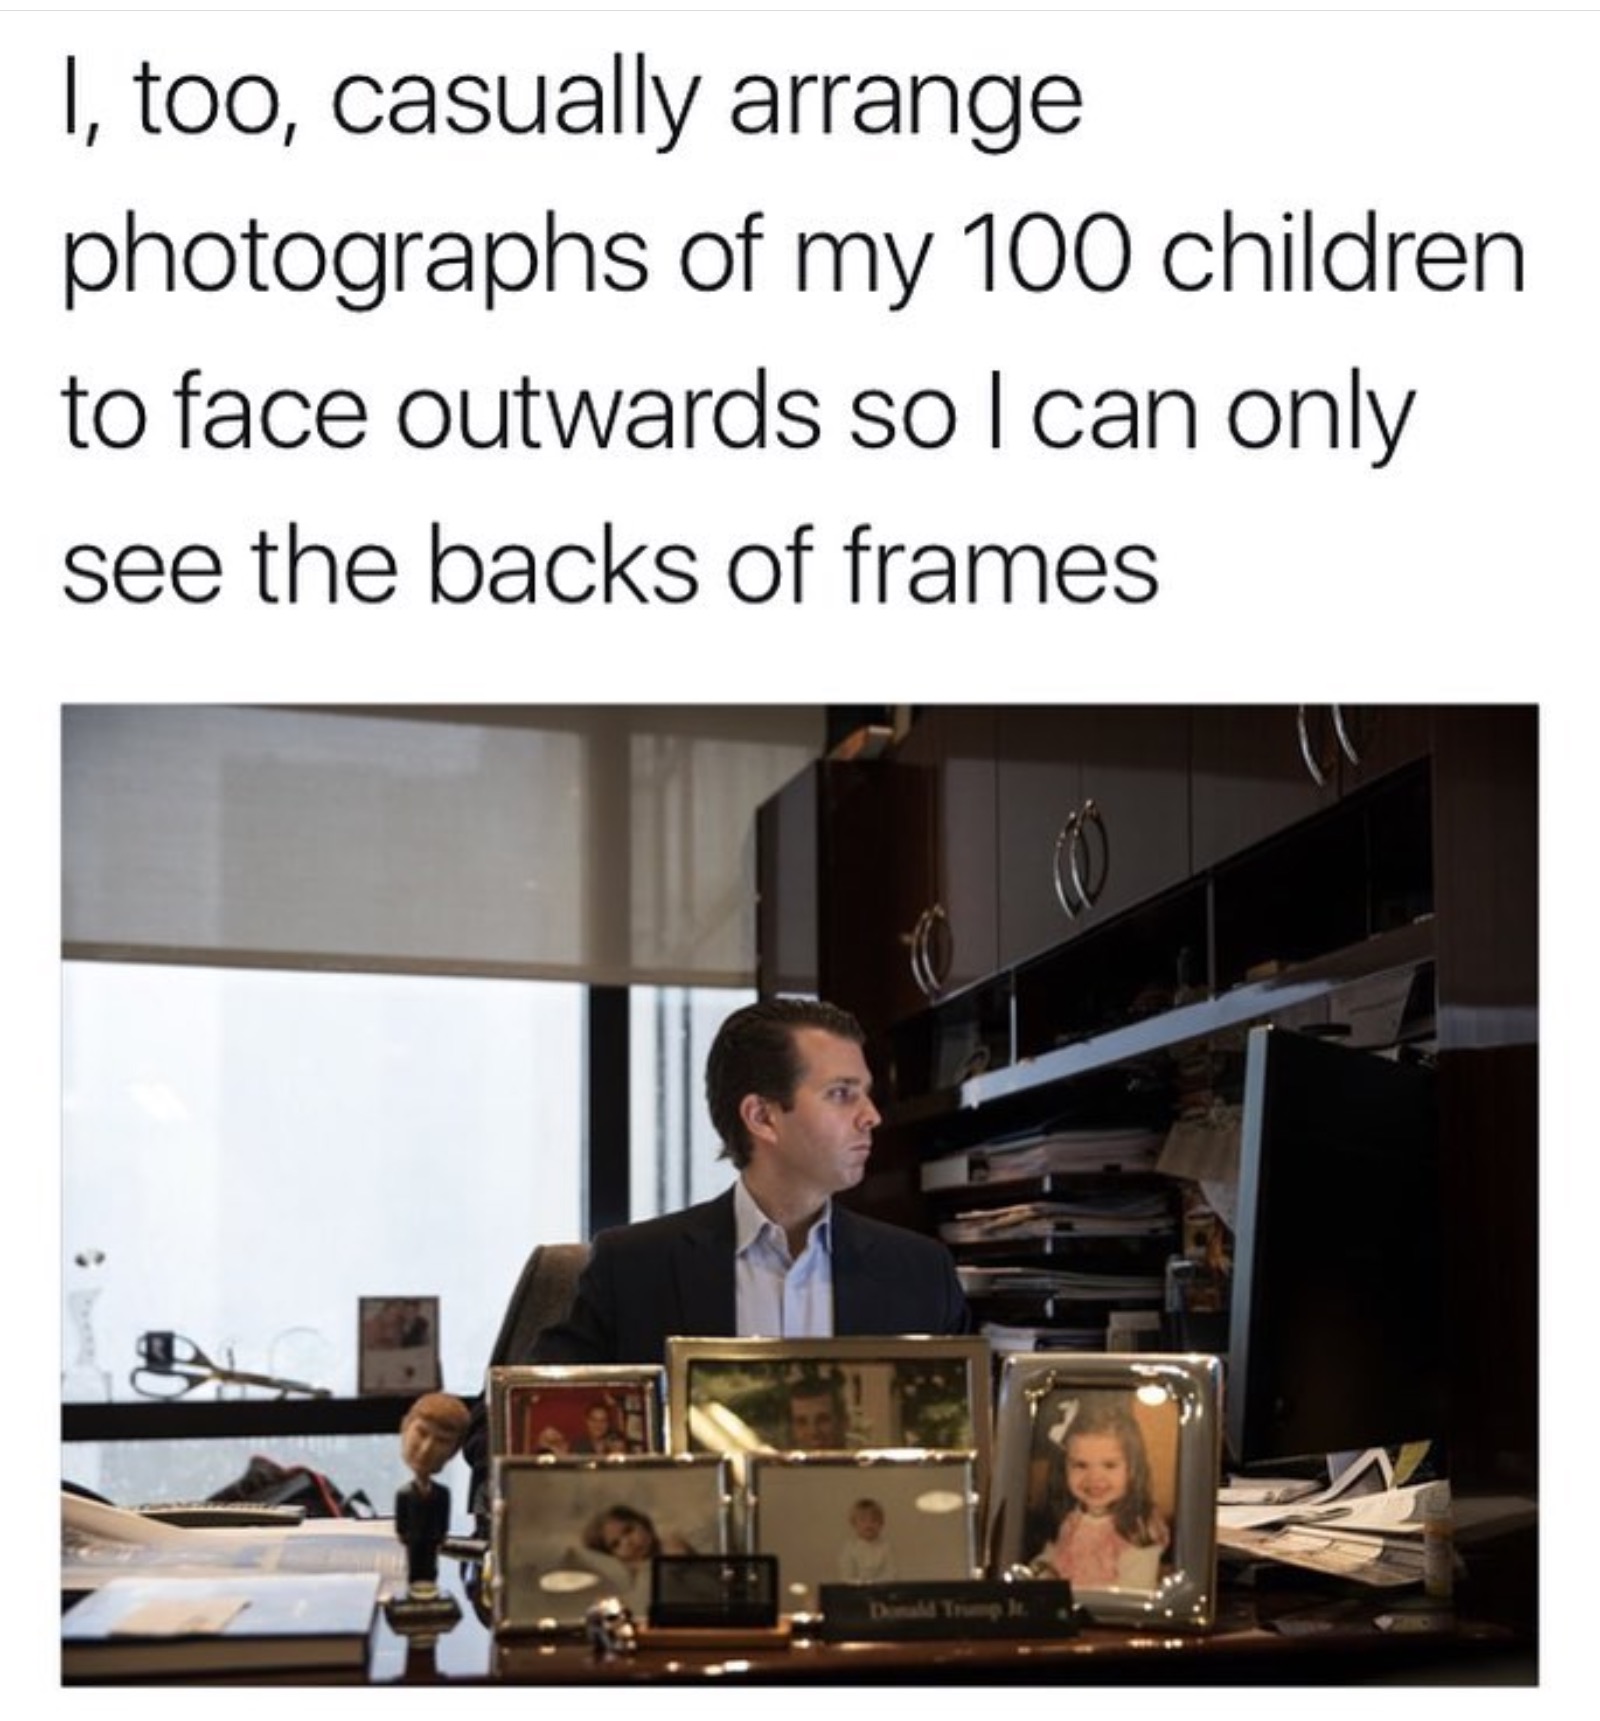 Dank meme of Eric Trump casually arranging his kids pictures outward on his desk.